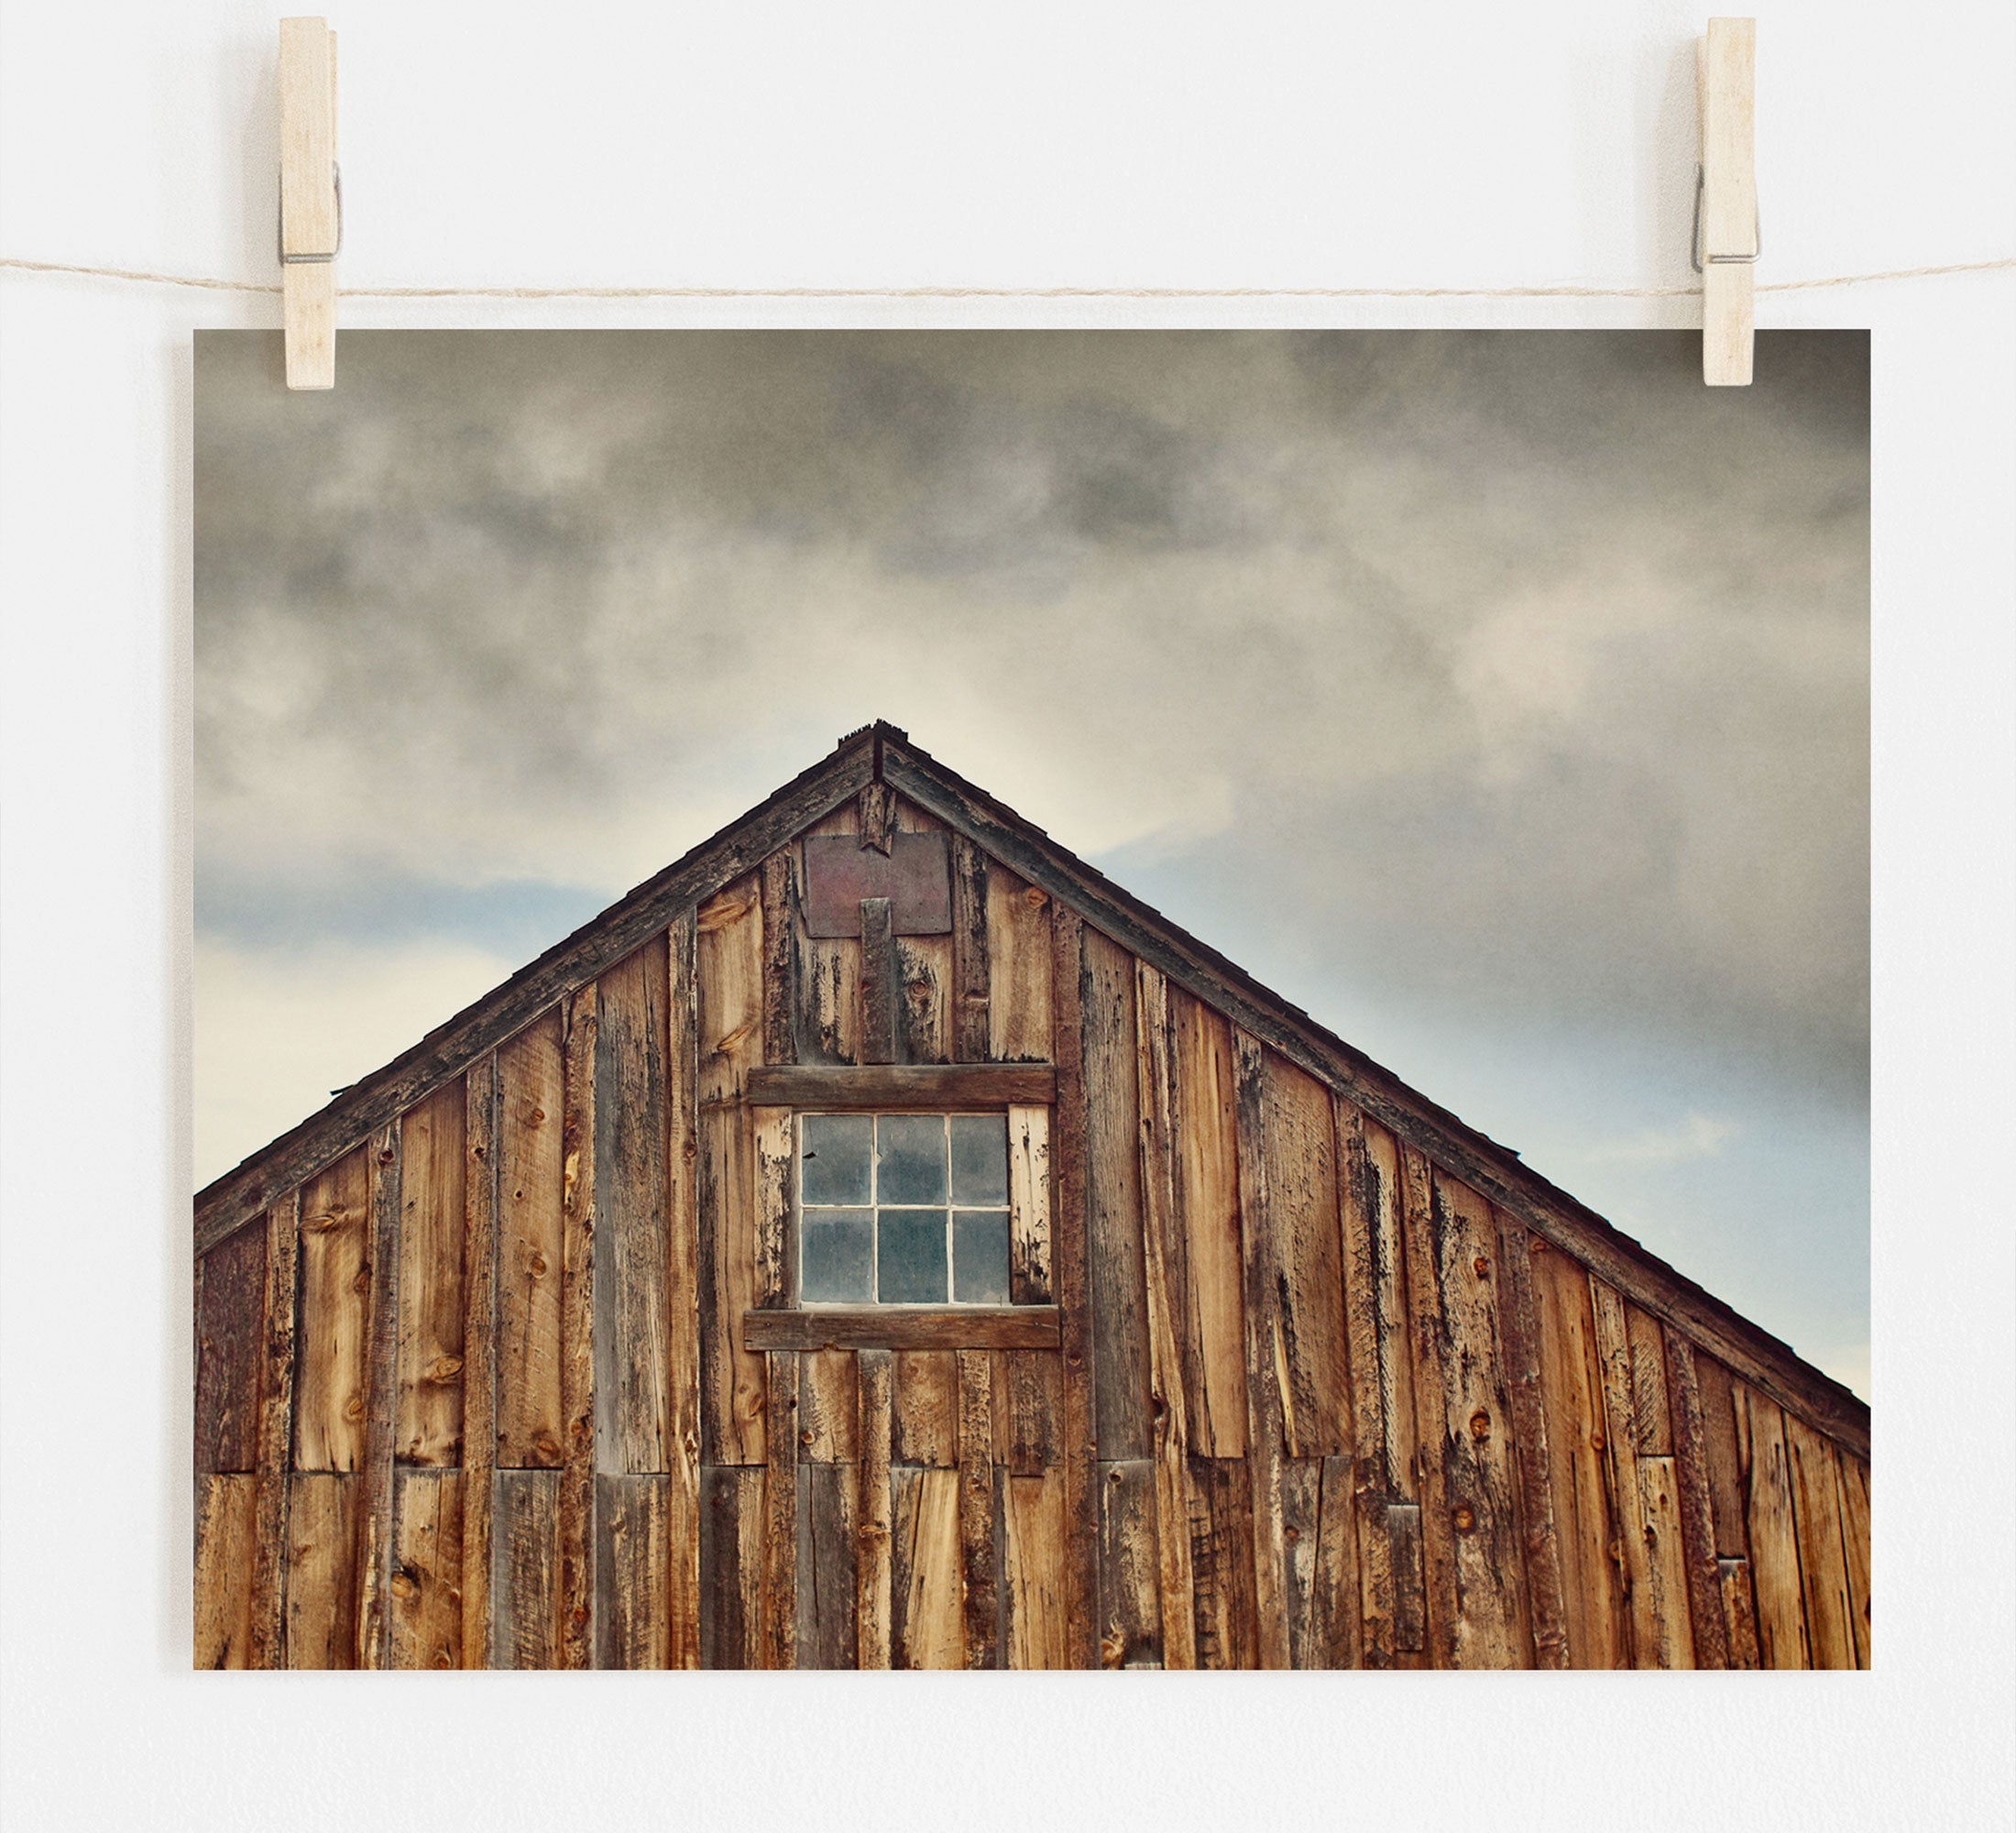 A photograph of a rustic farmhouse with a pitched roof and a single window, pinned up on white archival photographic paper by wooden clothespins. Dark clouds loom in the background. Offley Green's 'Old Barn at Bodie' Farmhouse Rustic Print is a stunning addition to any decor.